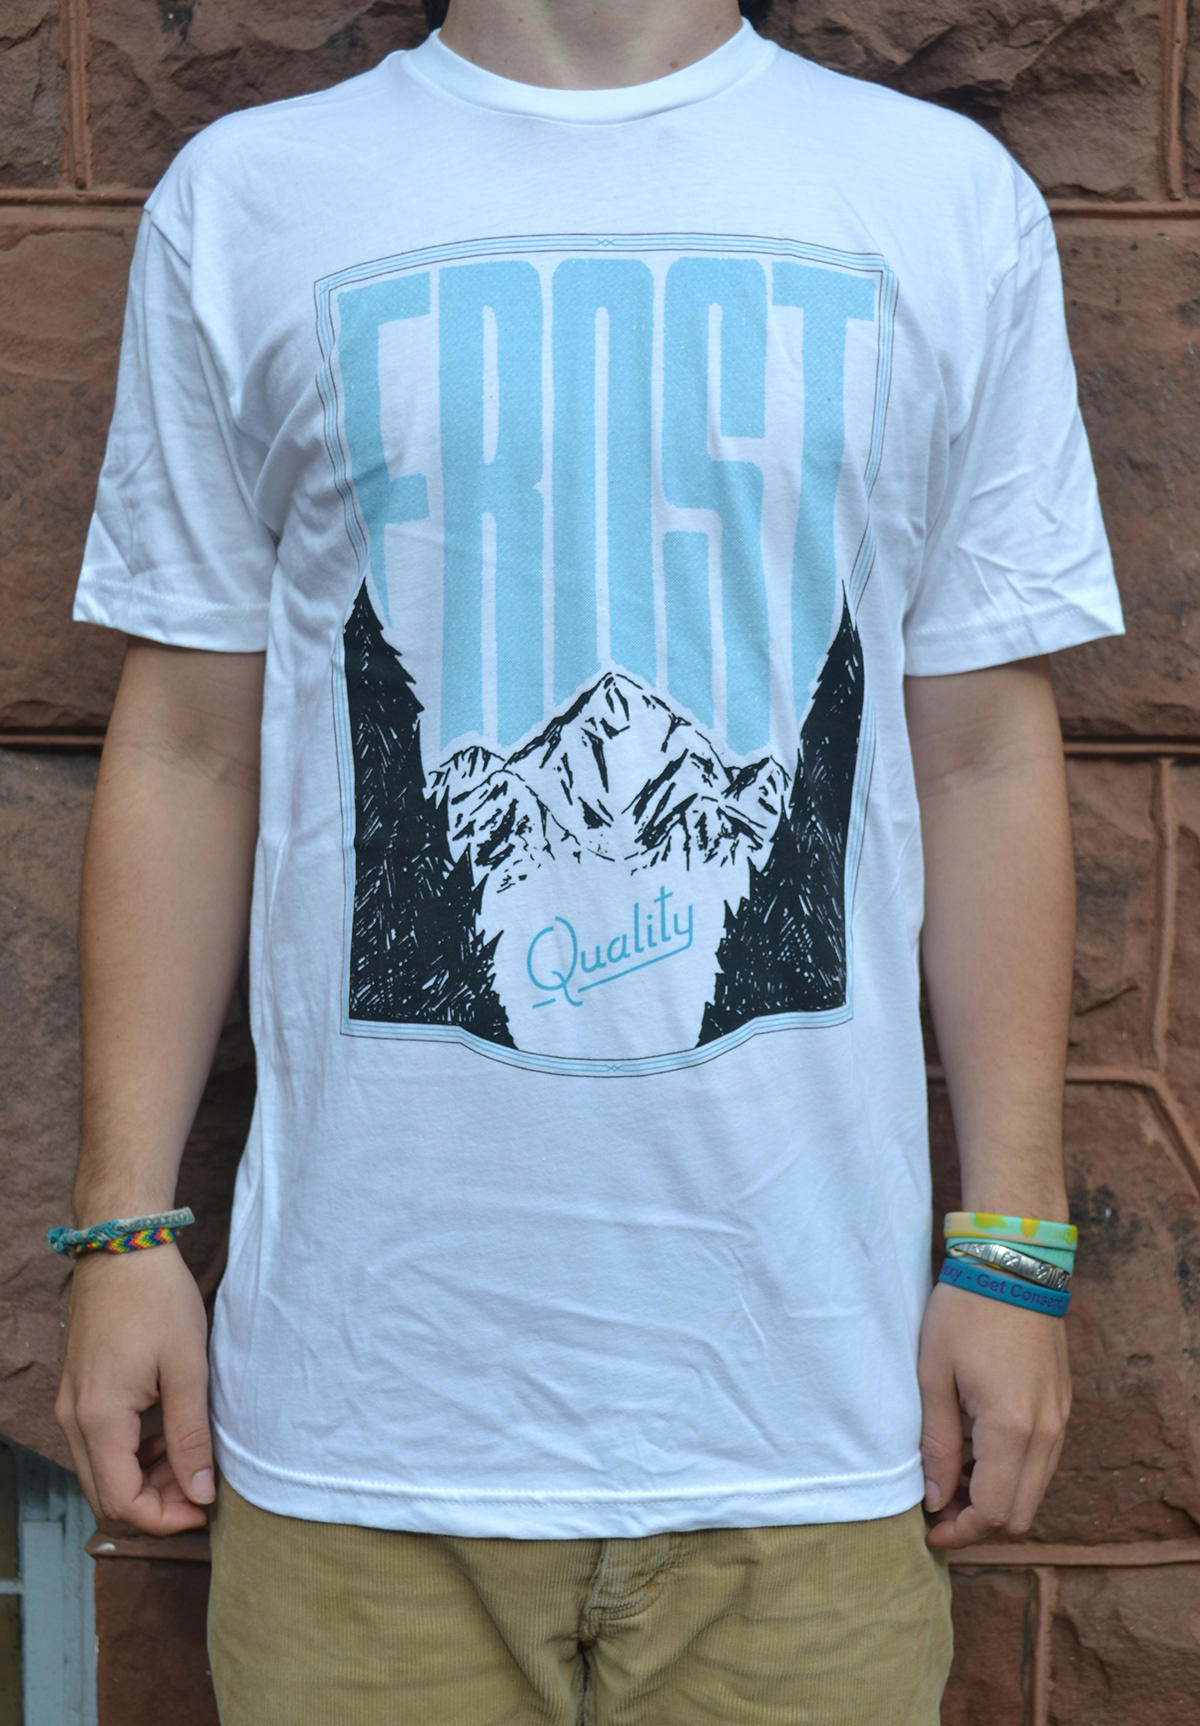 Frost Quality Clothing shirts T Shirt